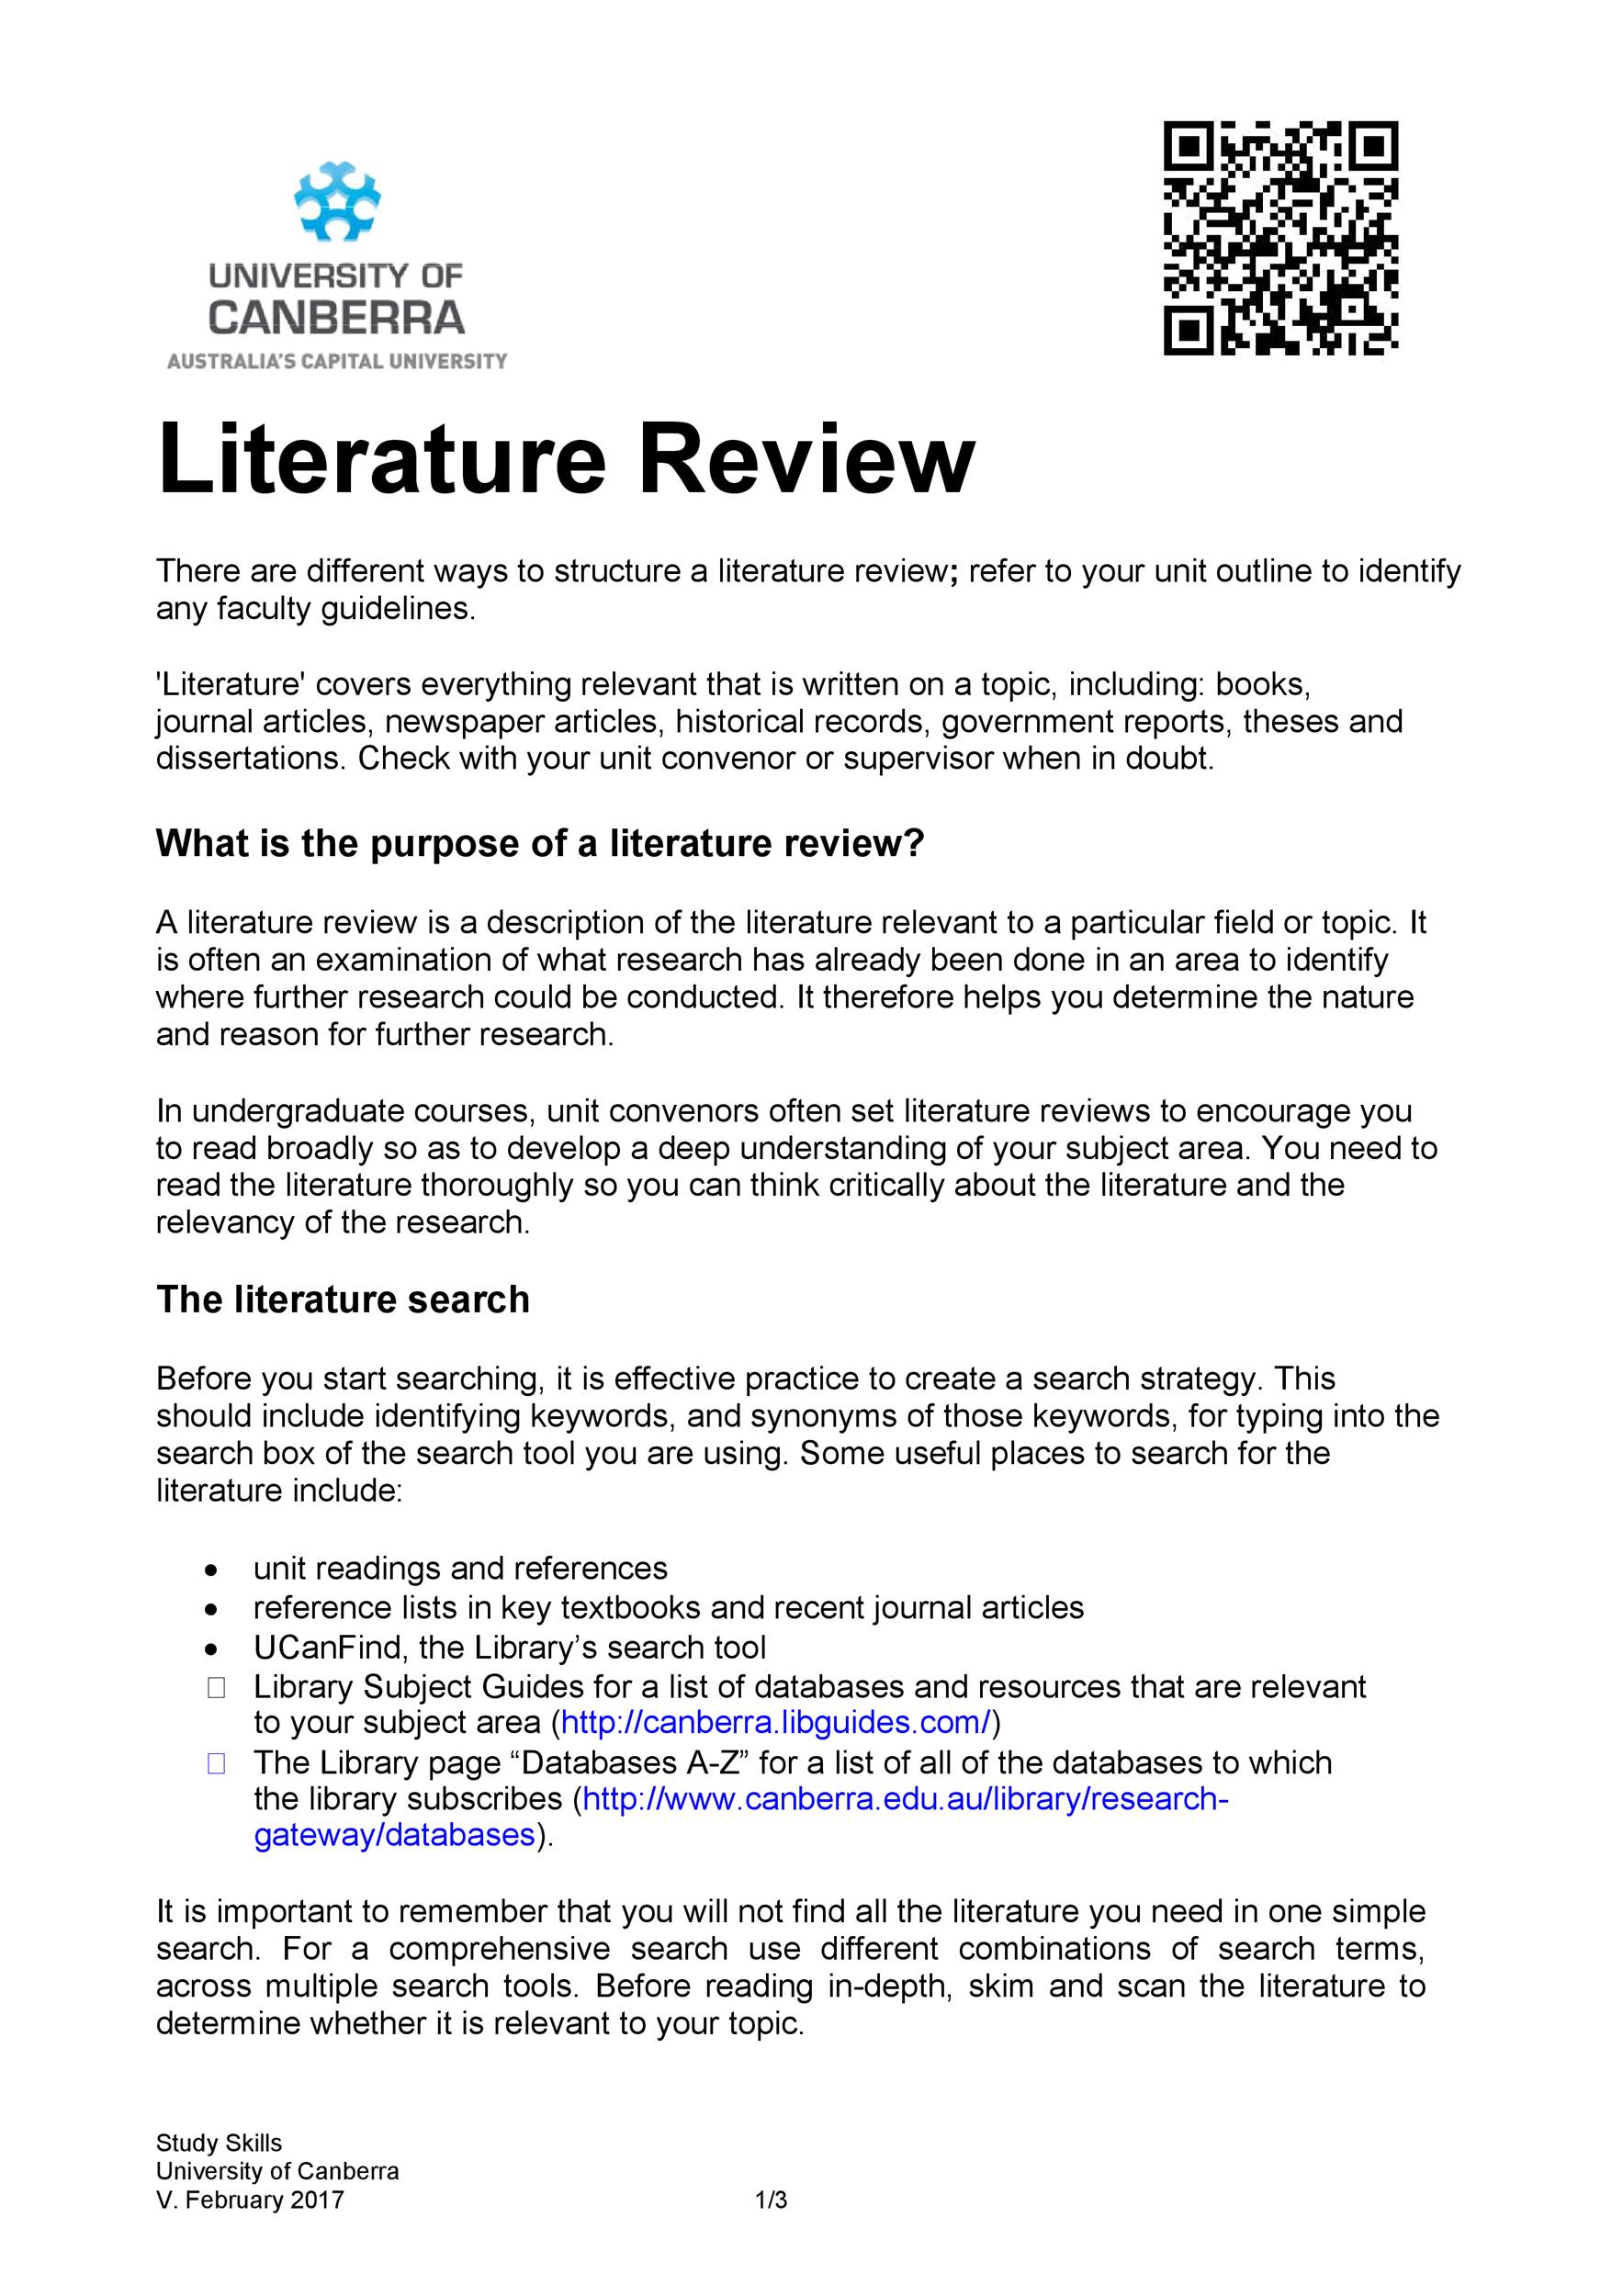 how do you write a literature review for a project